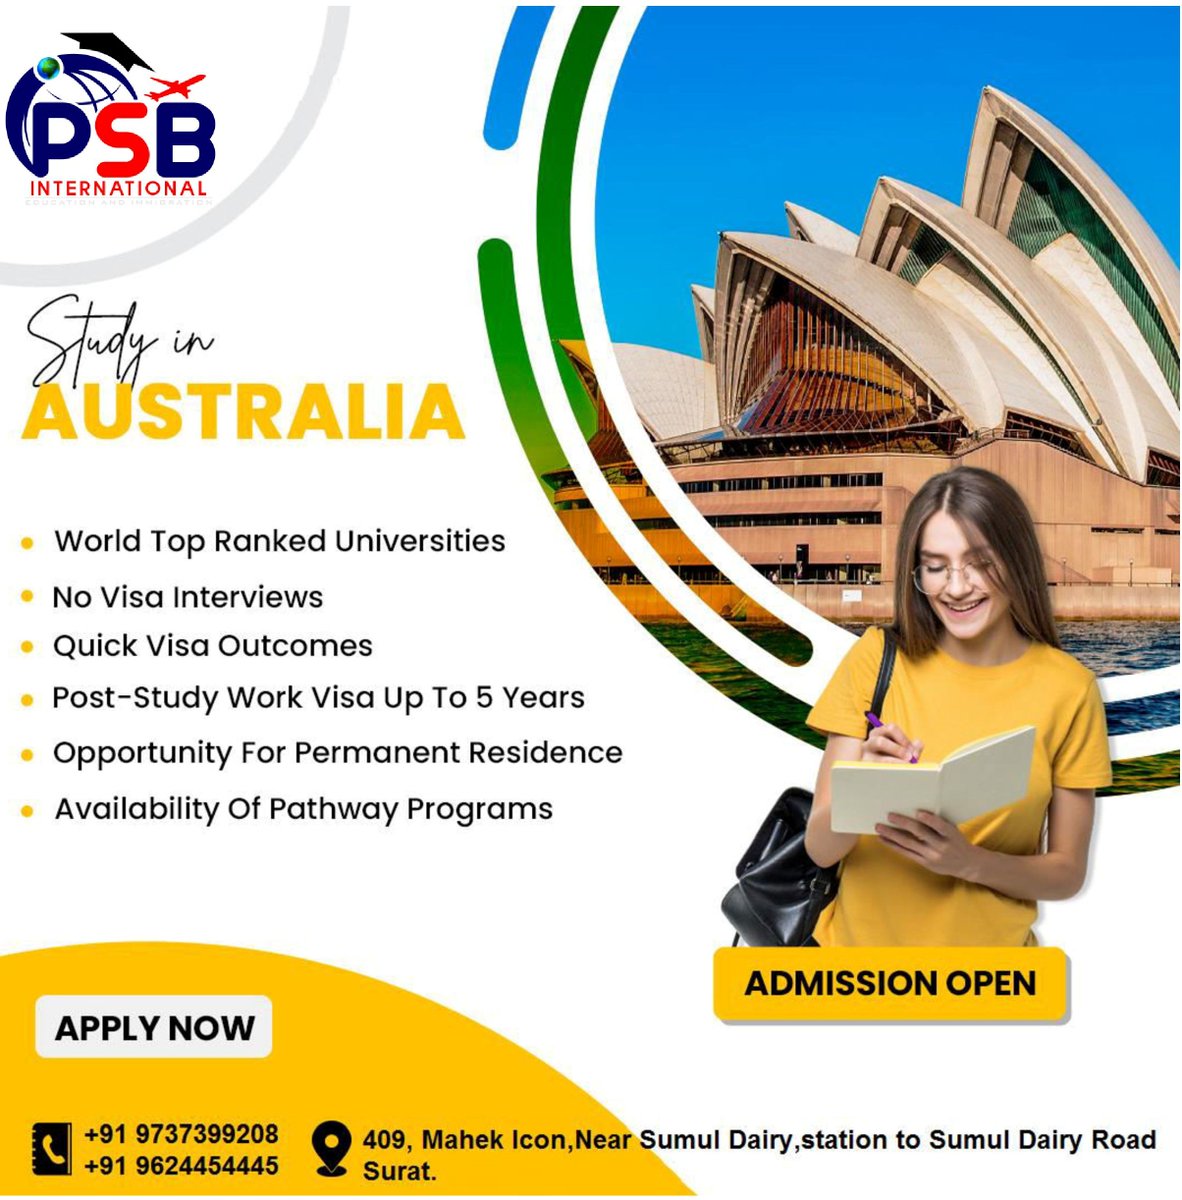 #australiaa#studyinaustralia#
#fasterprocess#easygetPR#
#besteducation#expertsguidance#
#bestcollages#
#lowcost#QualityOfEducation#
#workafterstudy#AddmissionOpen#5yearworkvisa#
#psbinternational#Addmissionopen#